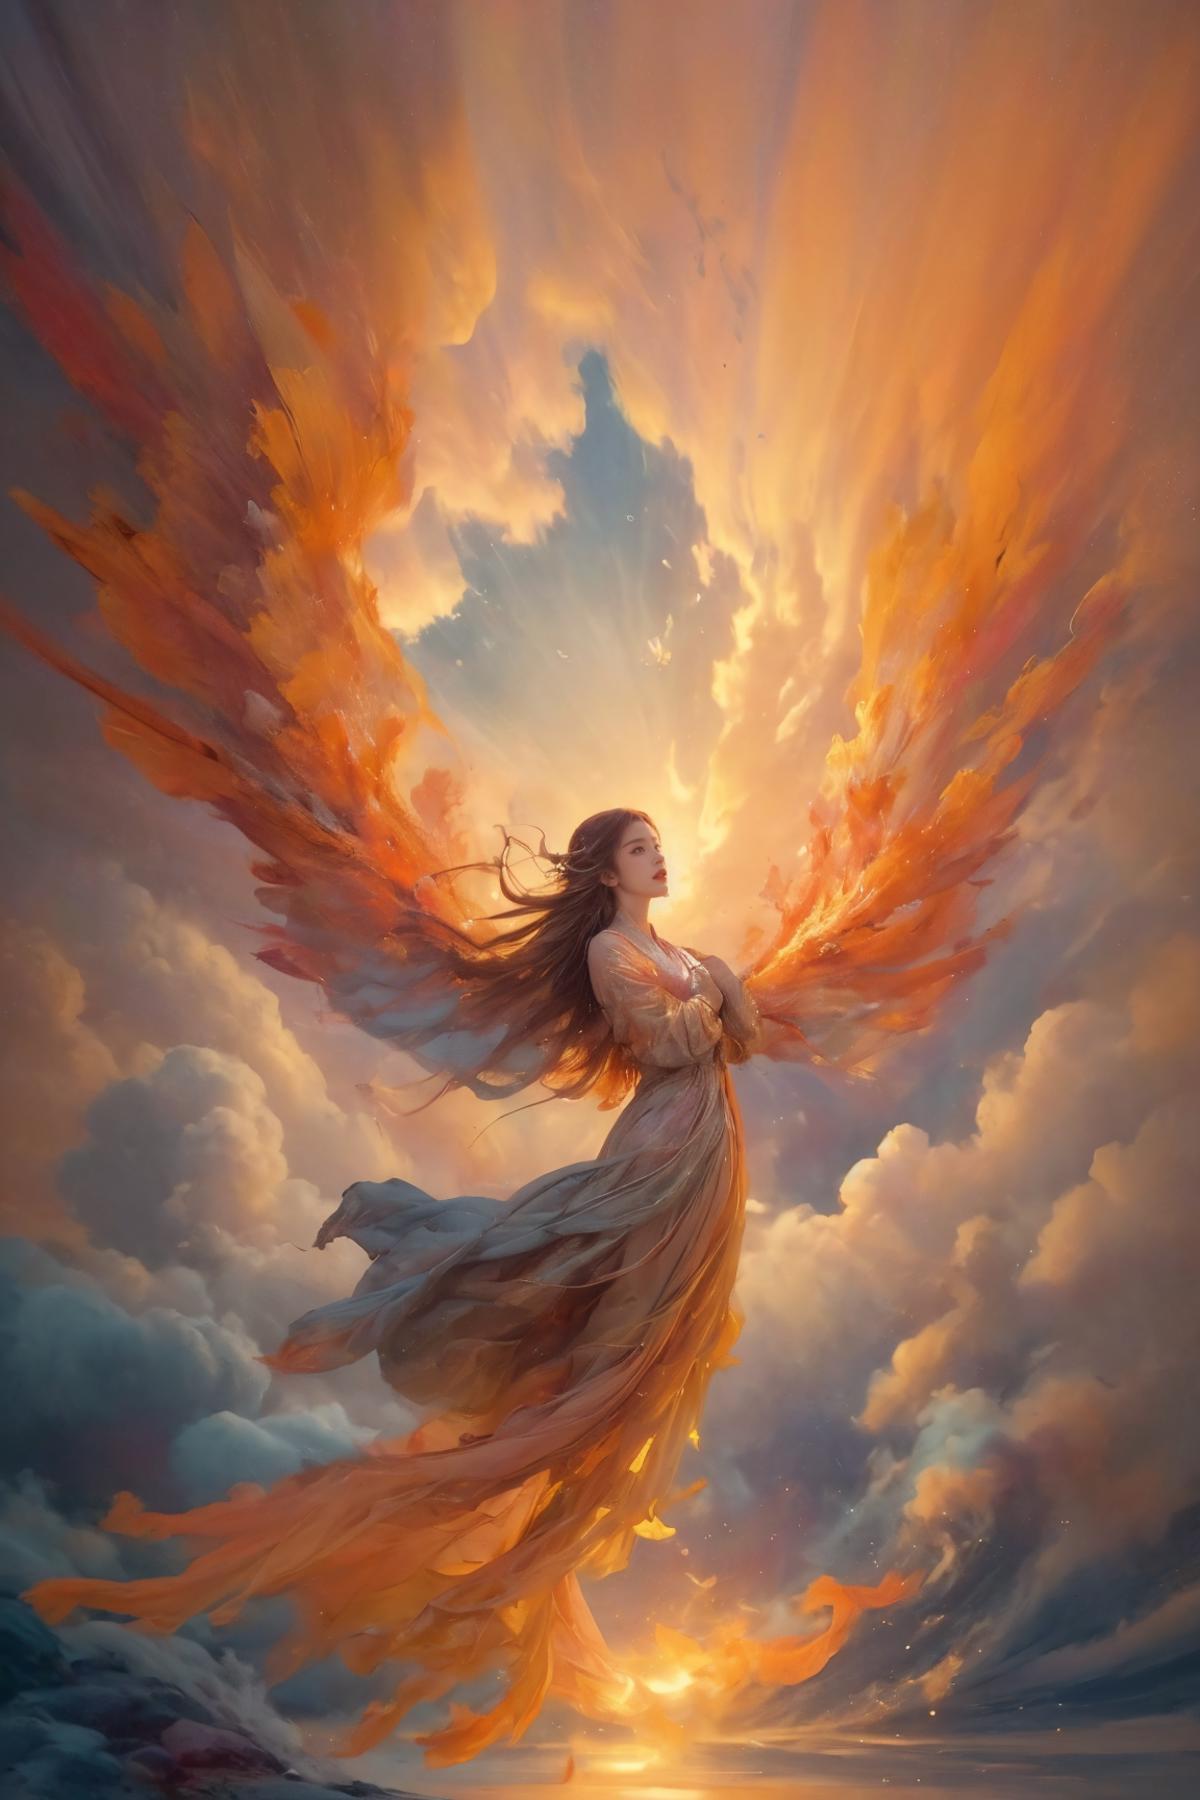 A beautiful angelic woman with wings, dressed in white, flying through the clouds.